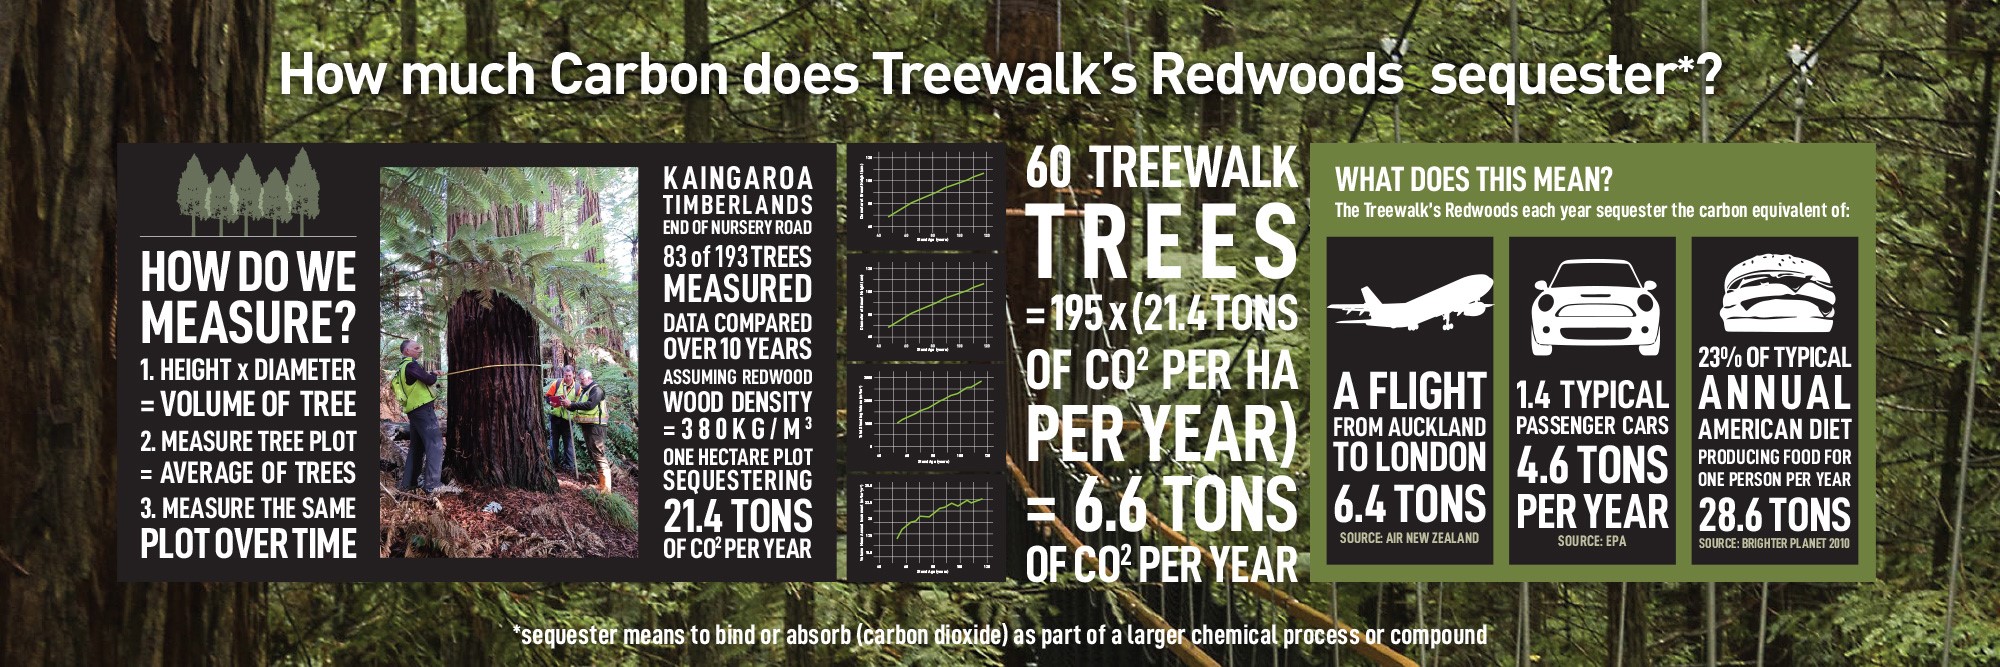 How much carbon does Treewalk sequester?